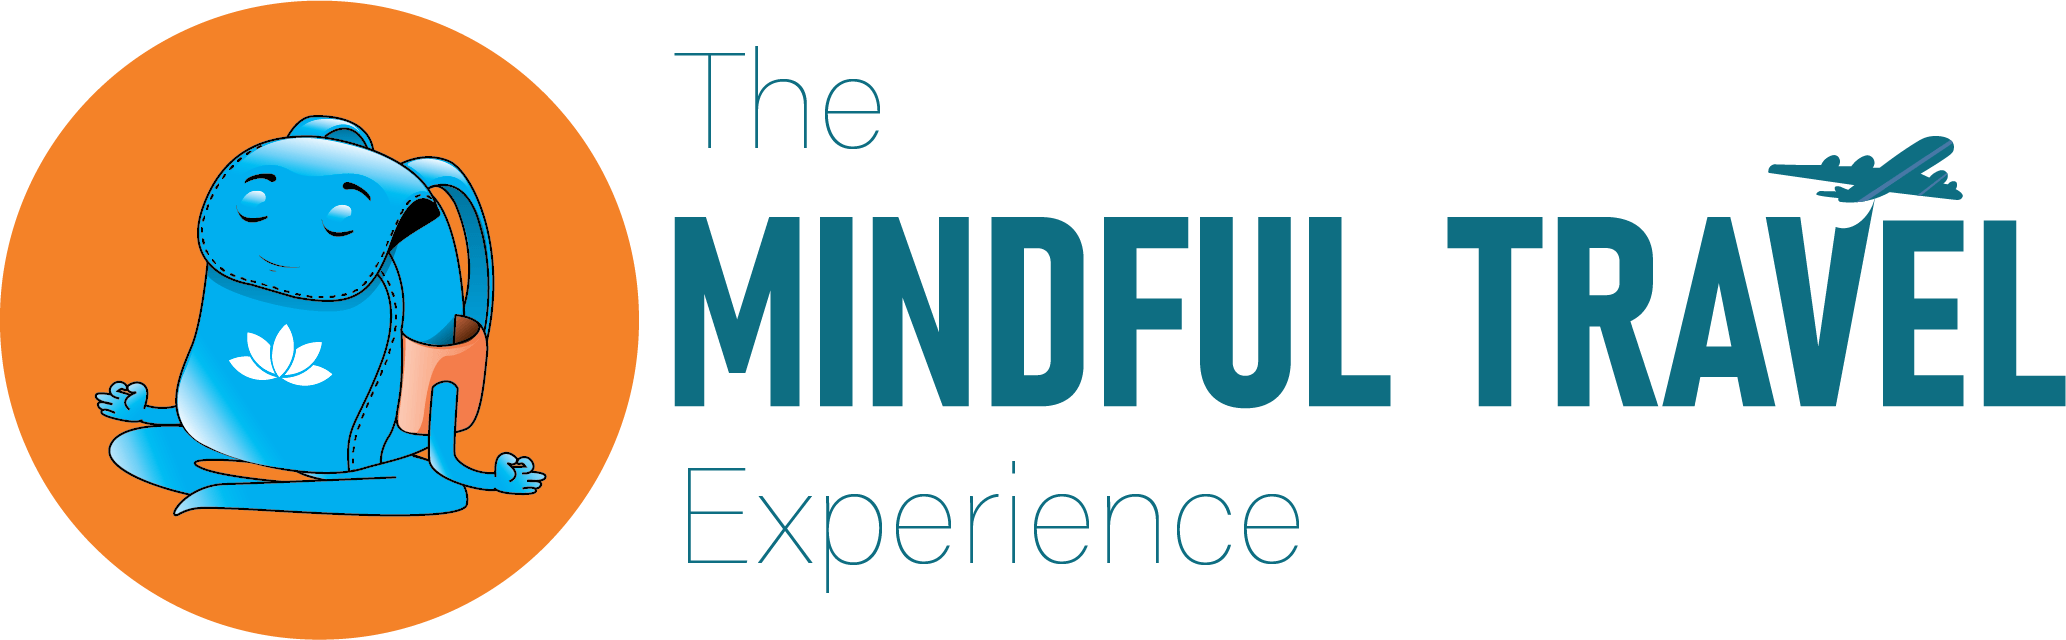 The Mindful Travel Experience